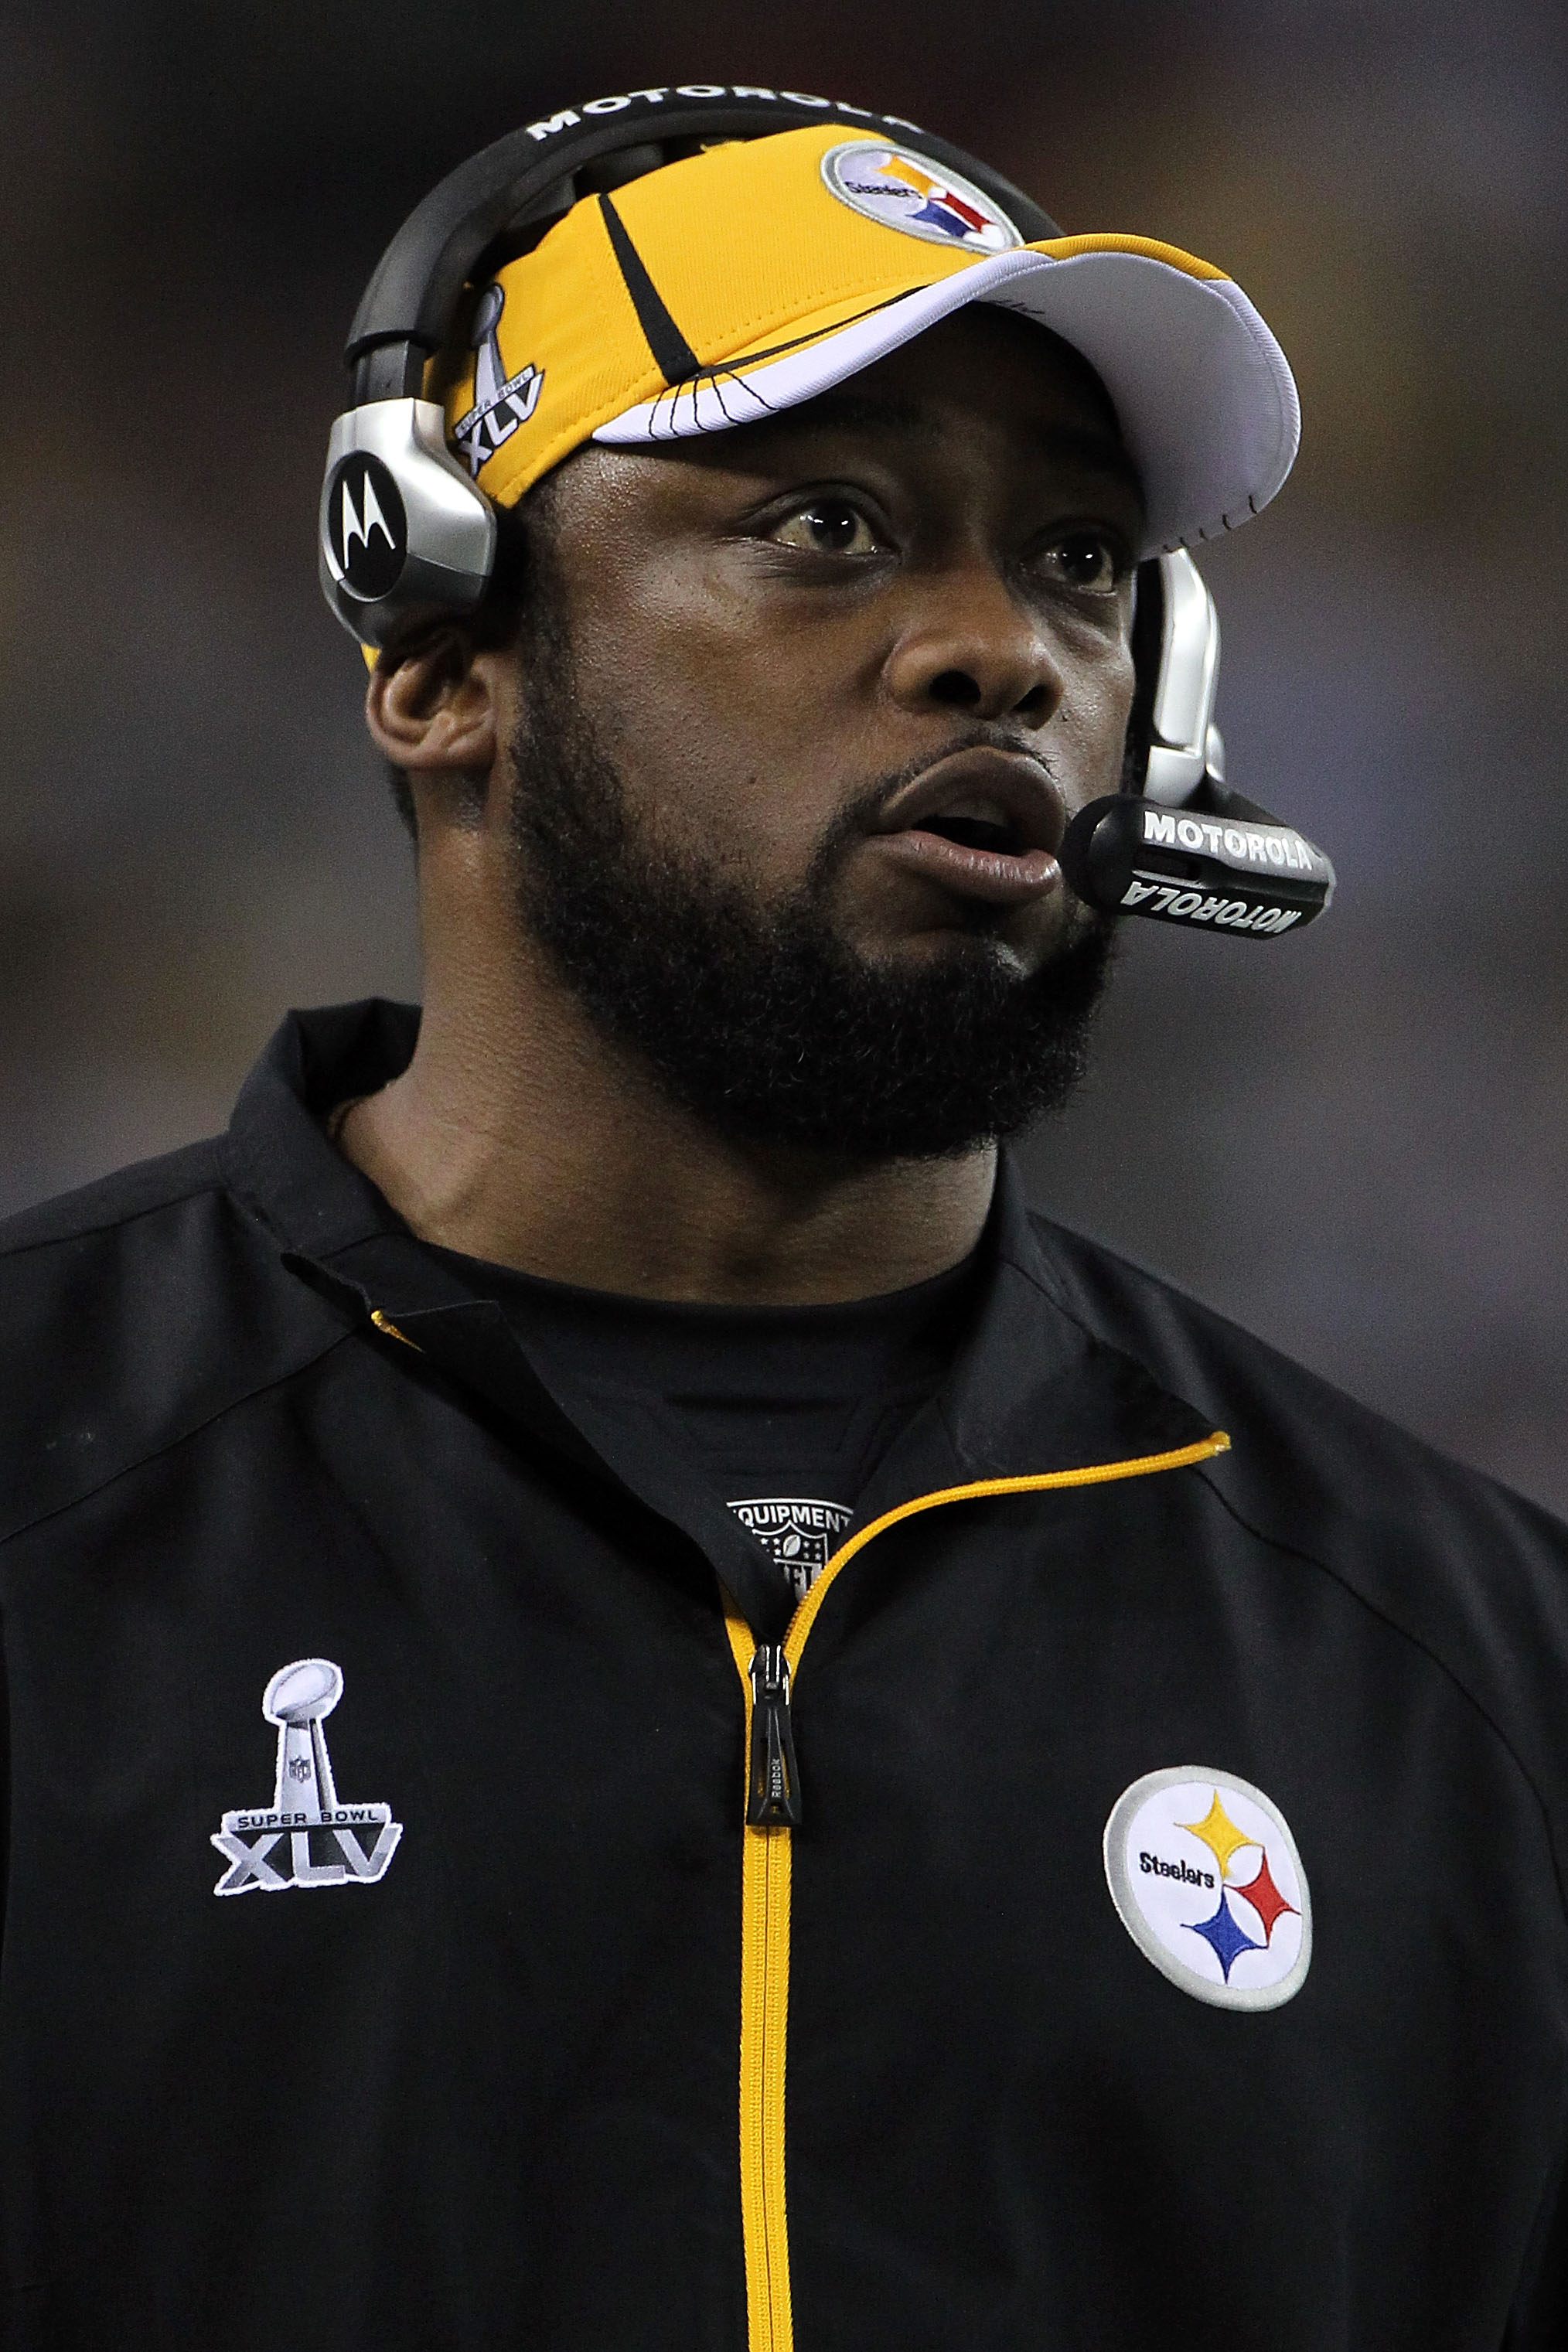 ARLINGTON, TX - FEBRUARY 06:  Head coach Mike Tomlin of the Pittsburgh Steelers looks on against the Green Bay Packers during the second quarter of Super Bowl XLV at Cowboys Stadium on February 6, 2011 in Arlington, Texas.  (Photo by Doug Pensinger/Getty